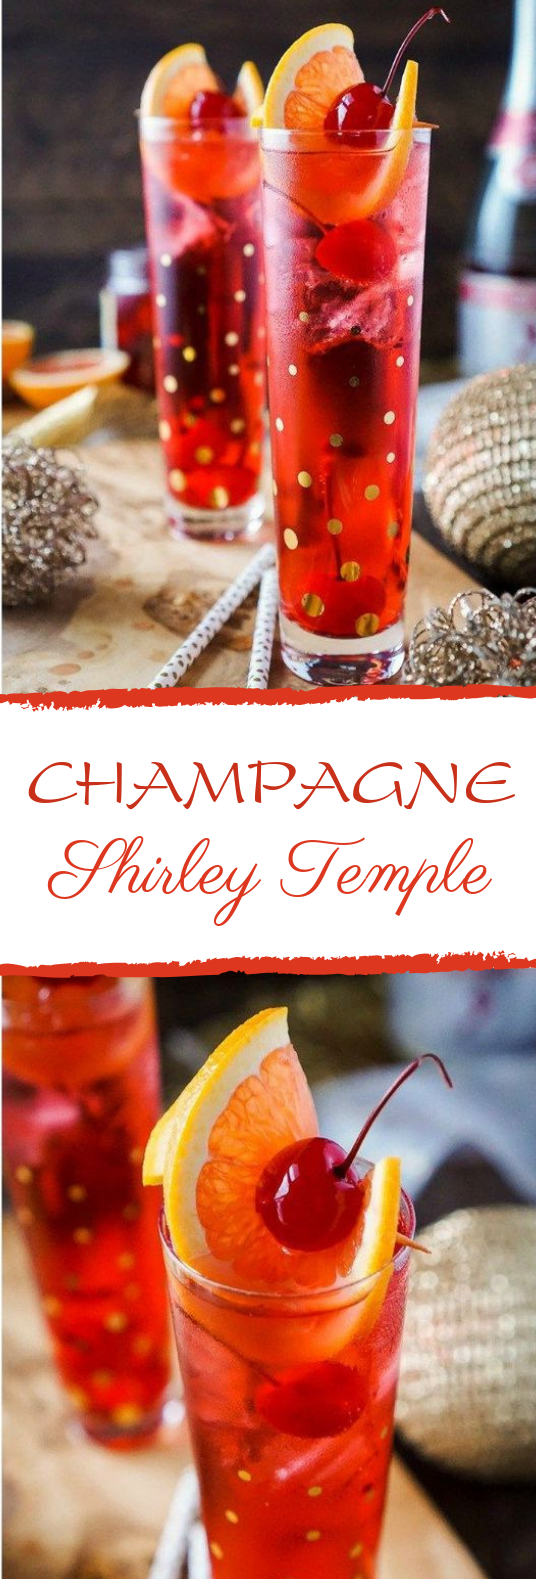 Champagne Shirley Temple #cocktail #drinks